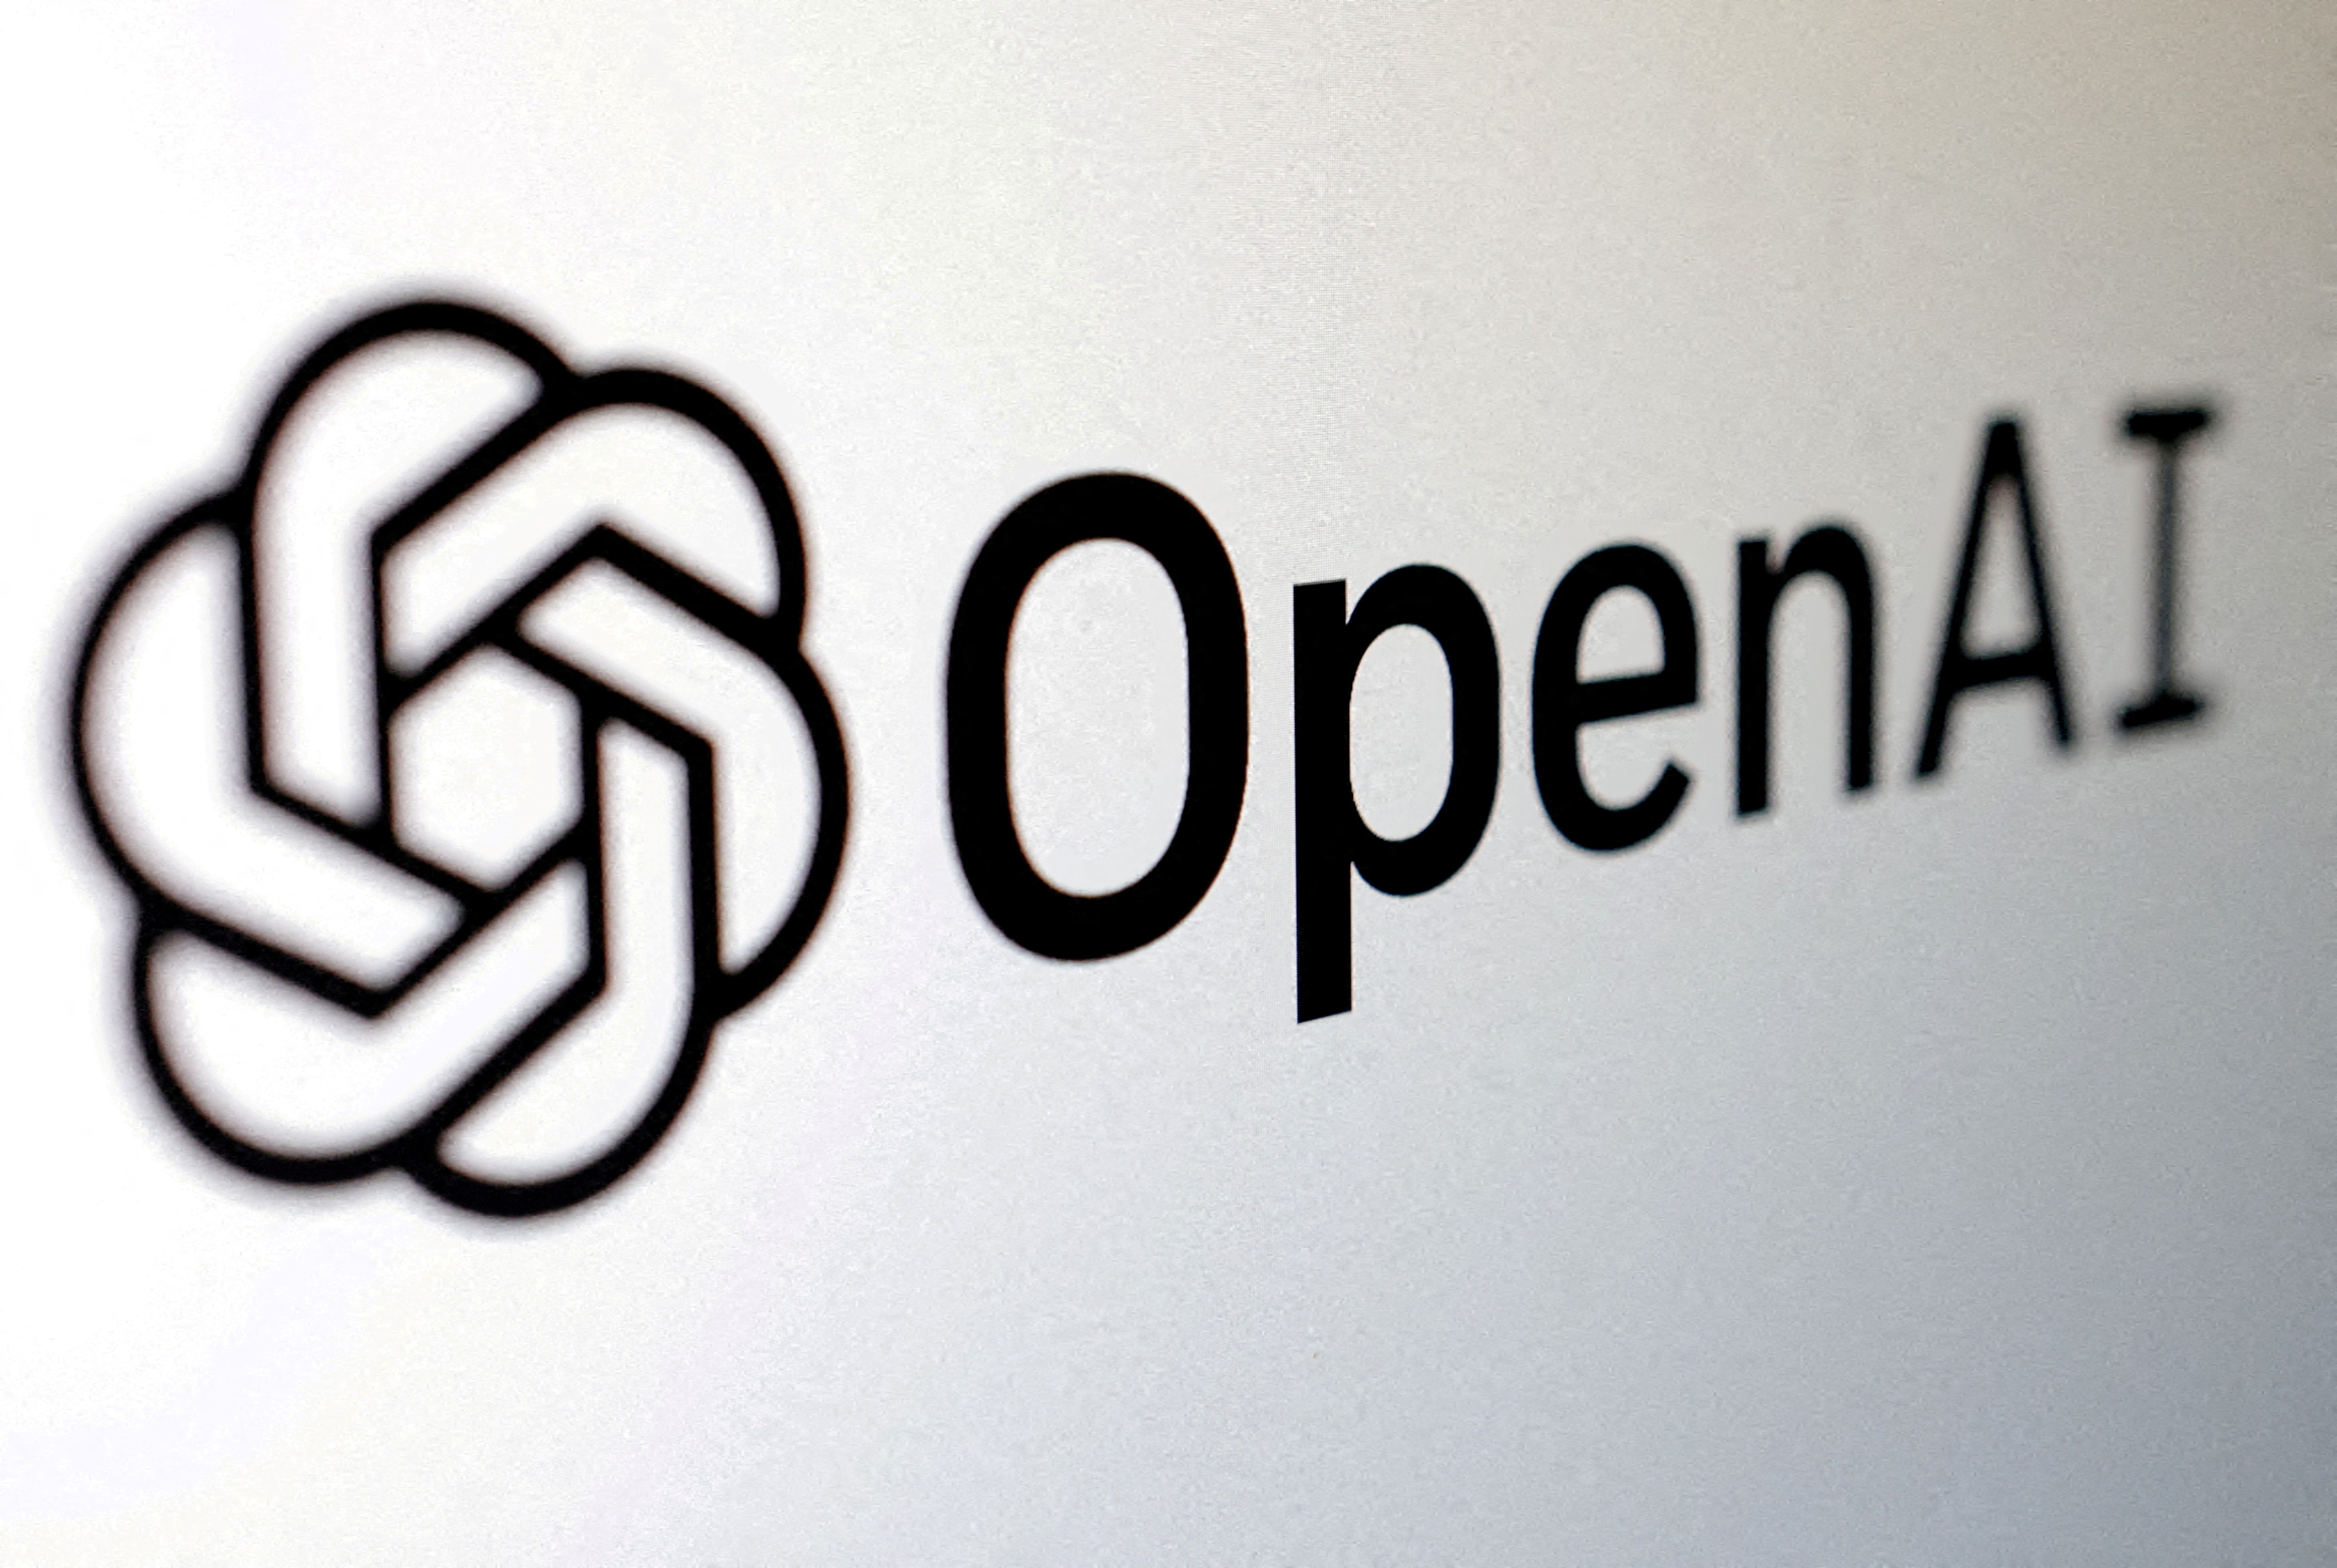 Global news publisher Axel Springer partners with OpenAI in